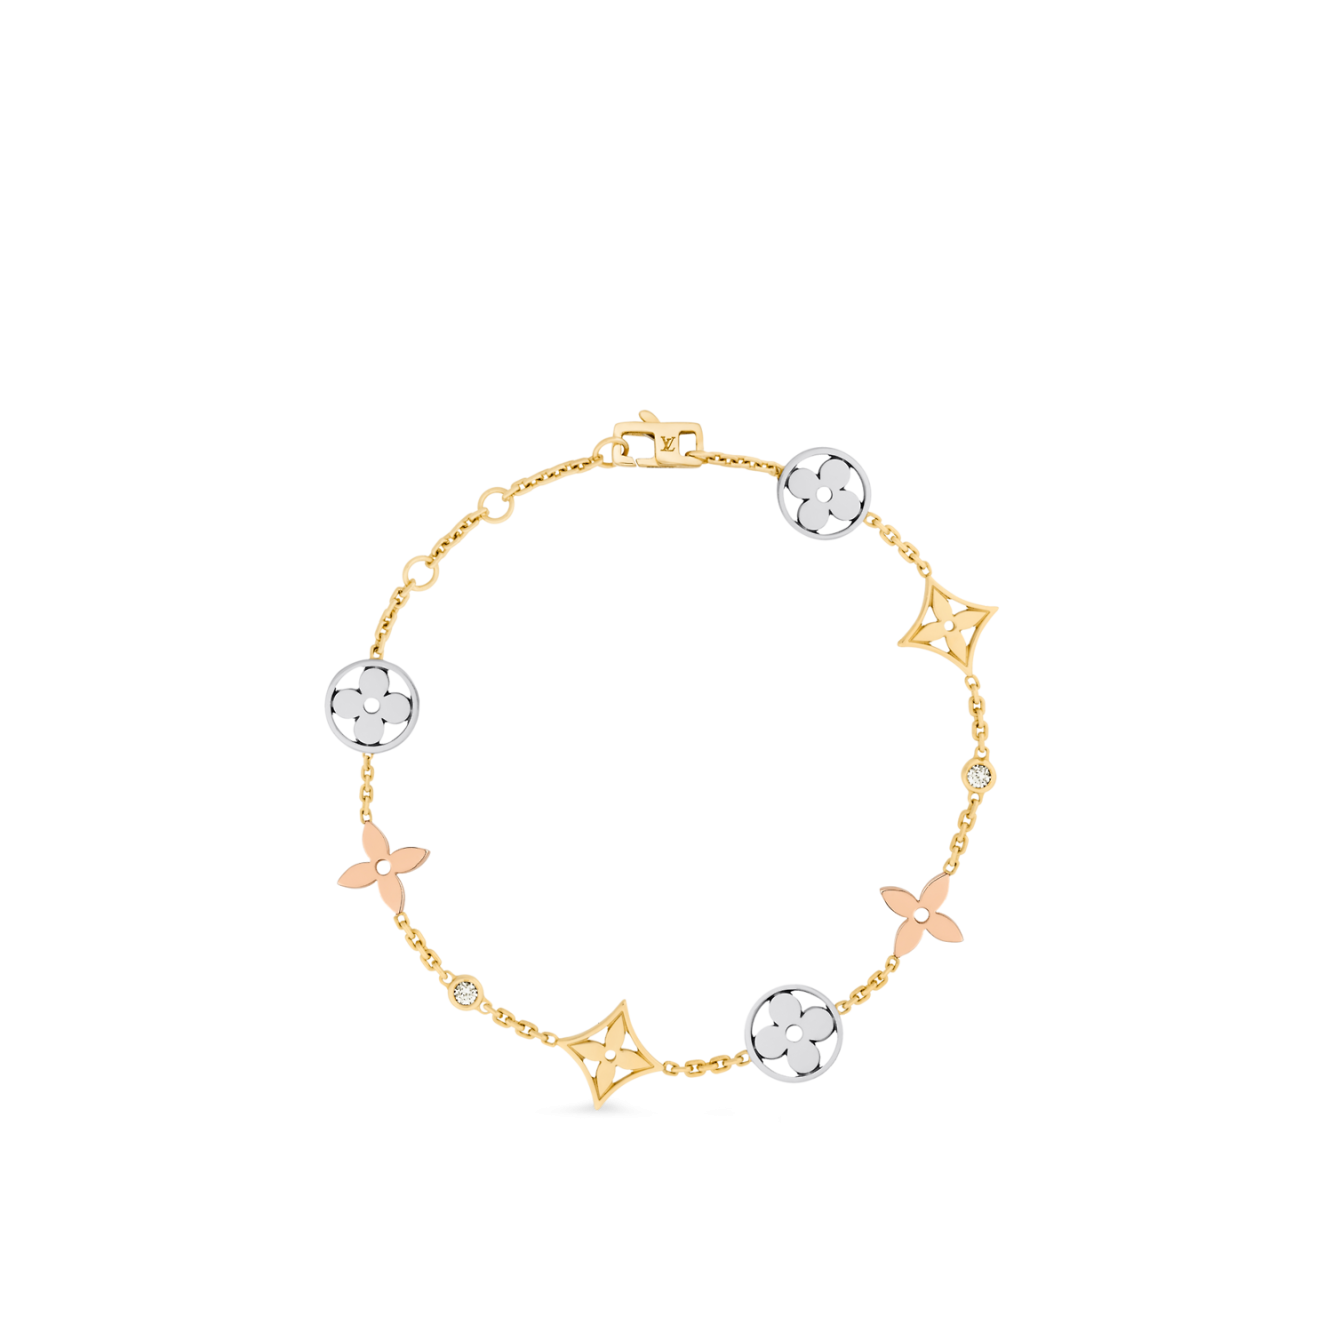 Idylle Blossom Two-Row Bracelet, White Gold And Diamonds - Categories